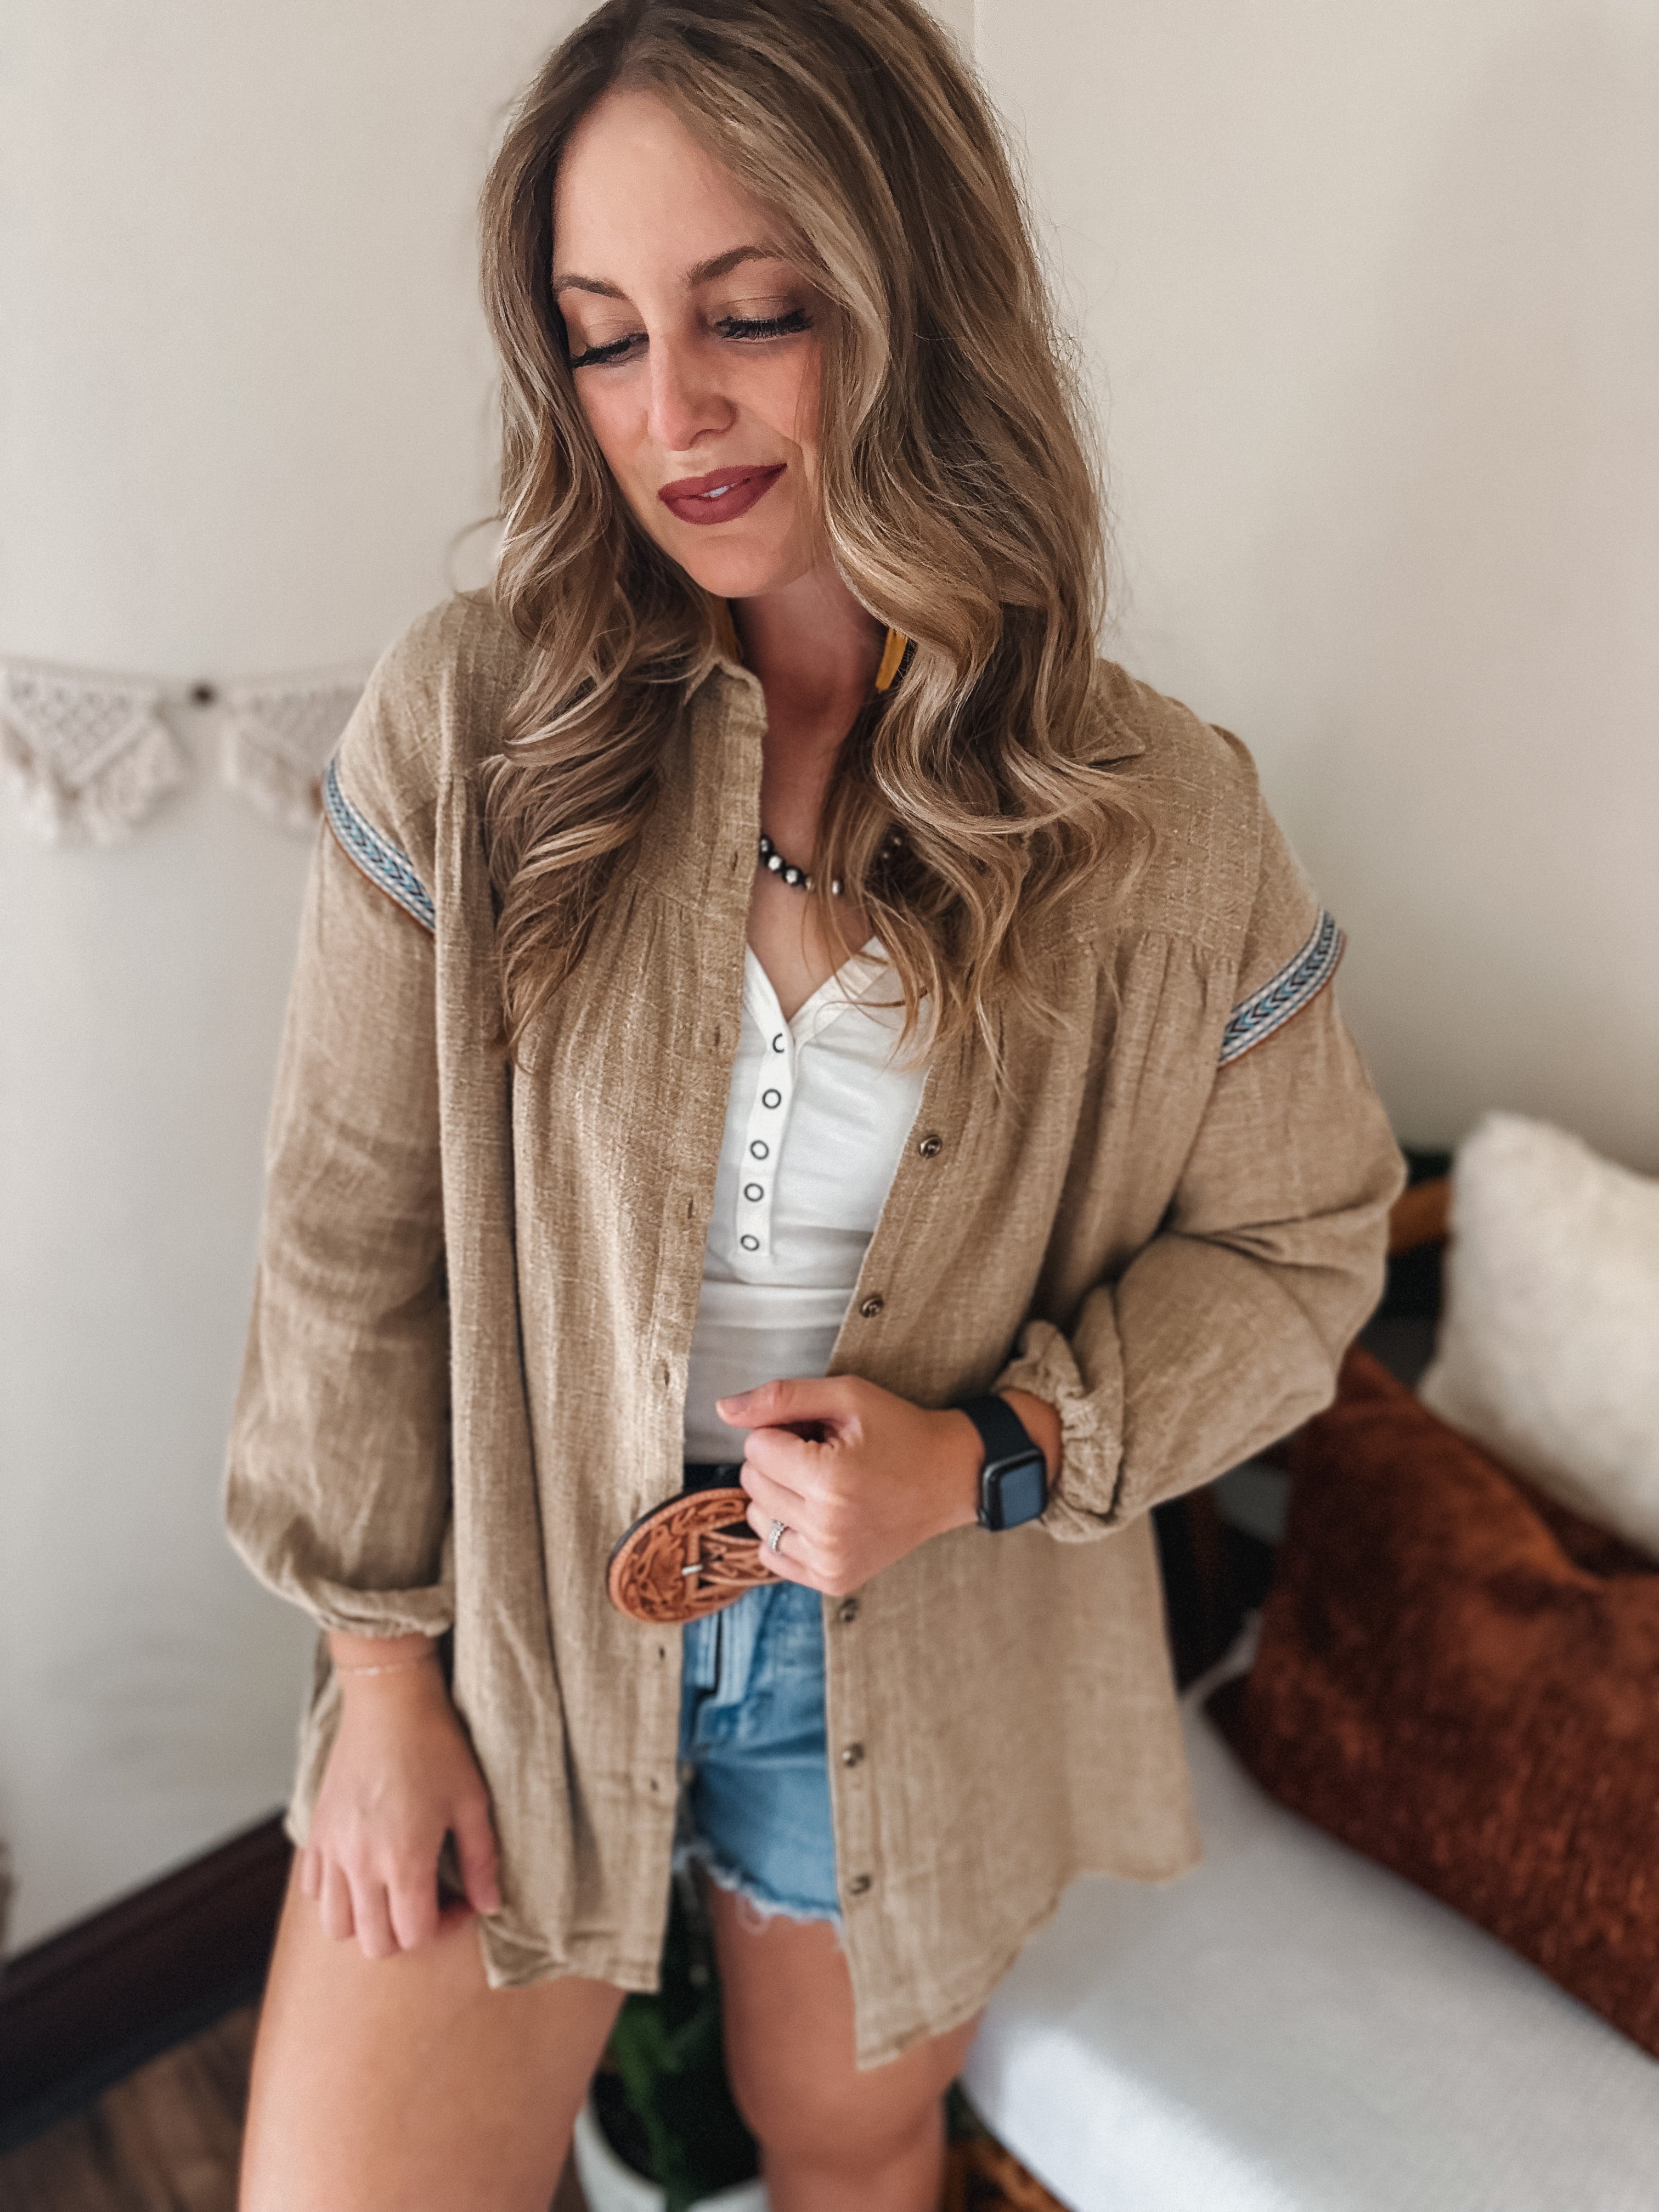 Camel Open Front Cardigan